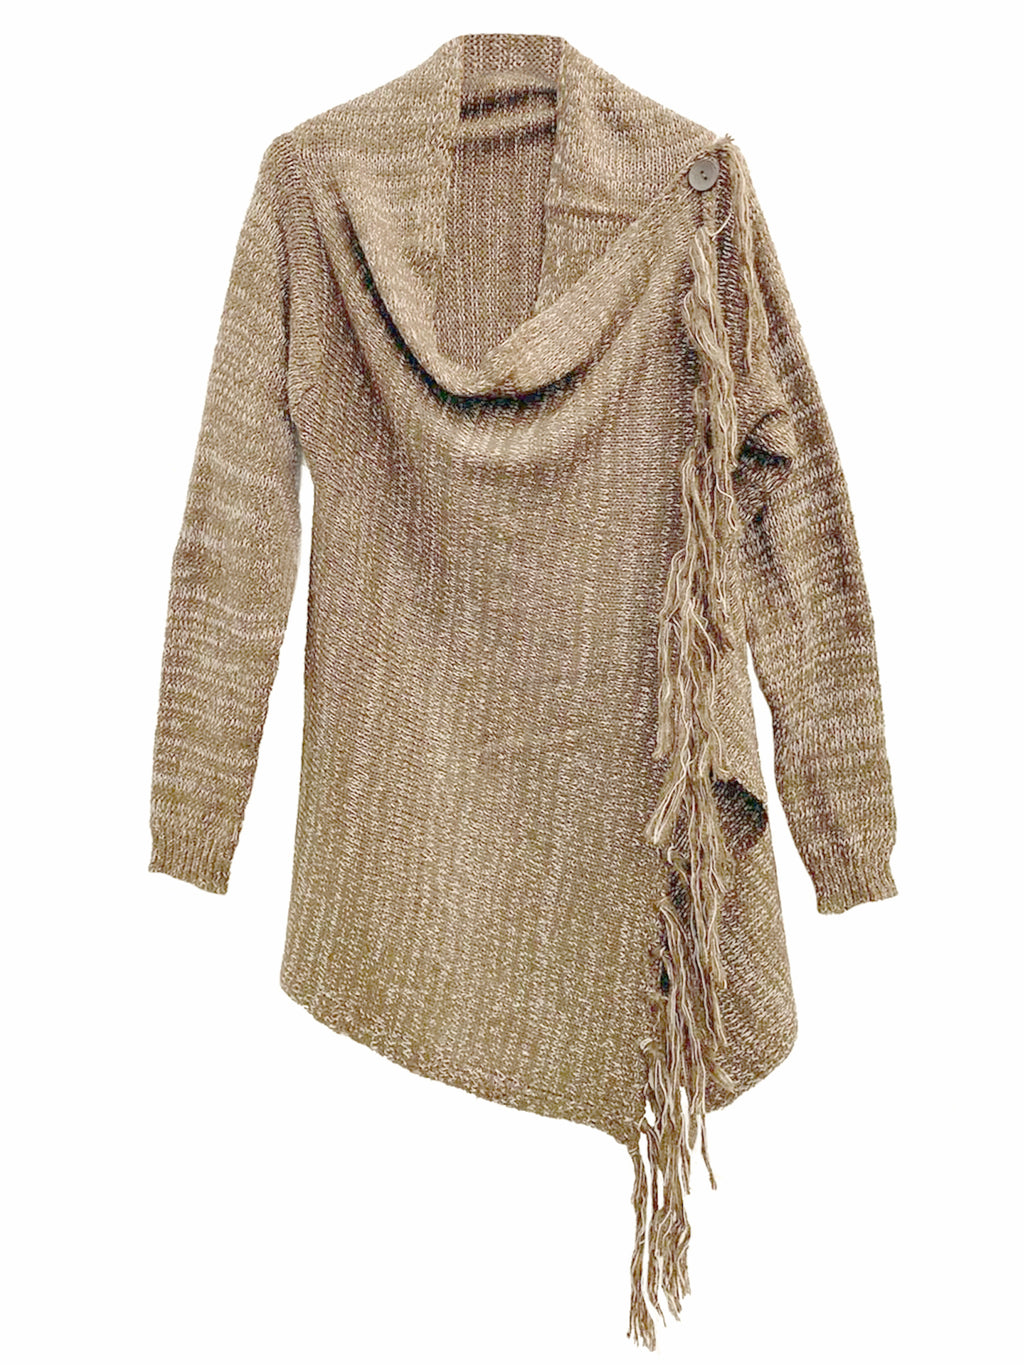 Asymmetrical Draped Knit Sweater With Fringe